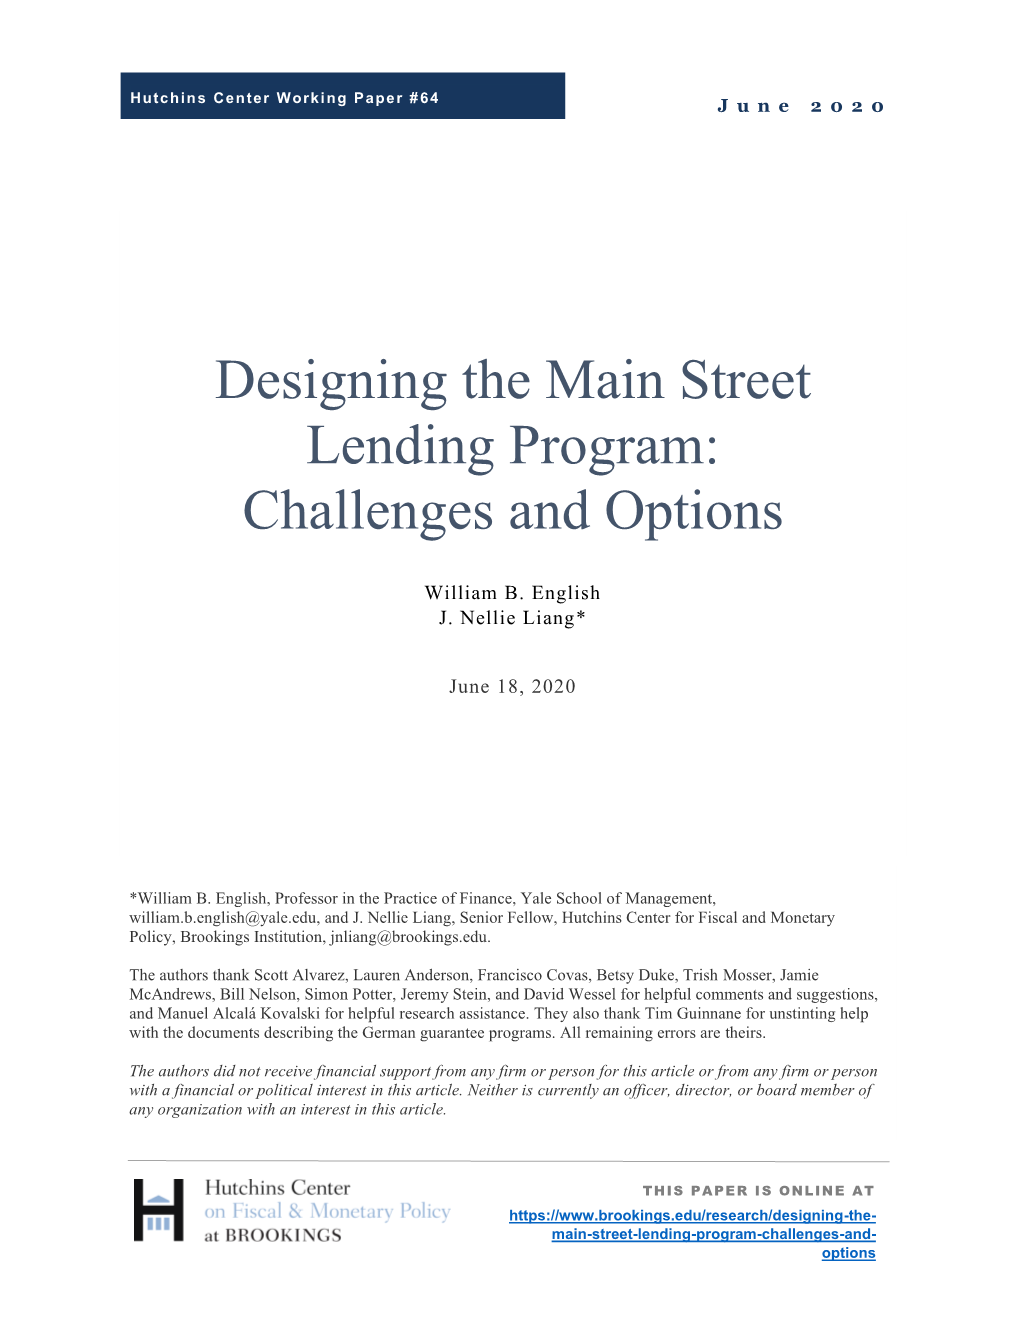 Designing the Main Street Lending Program: Challenges and Options